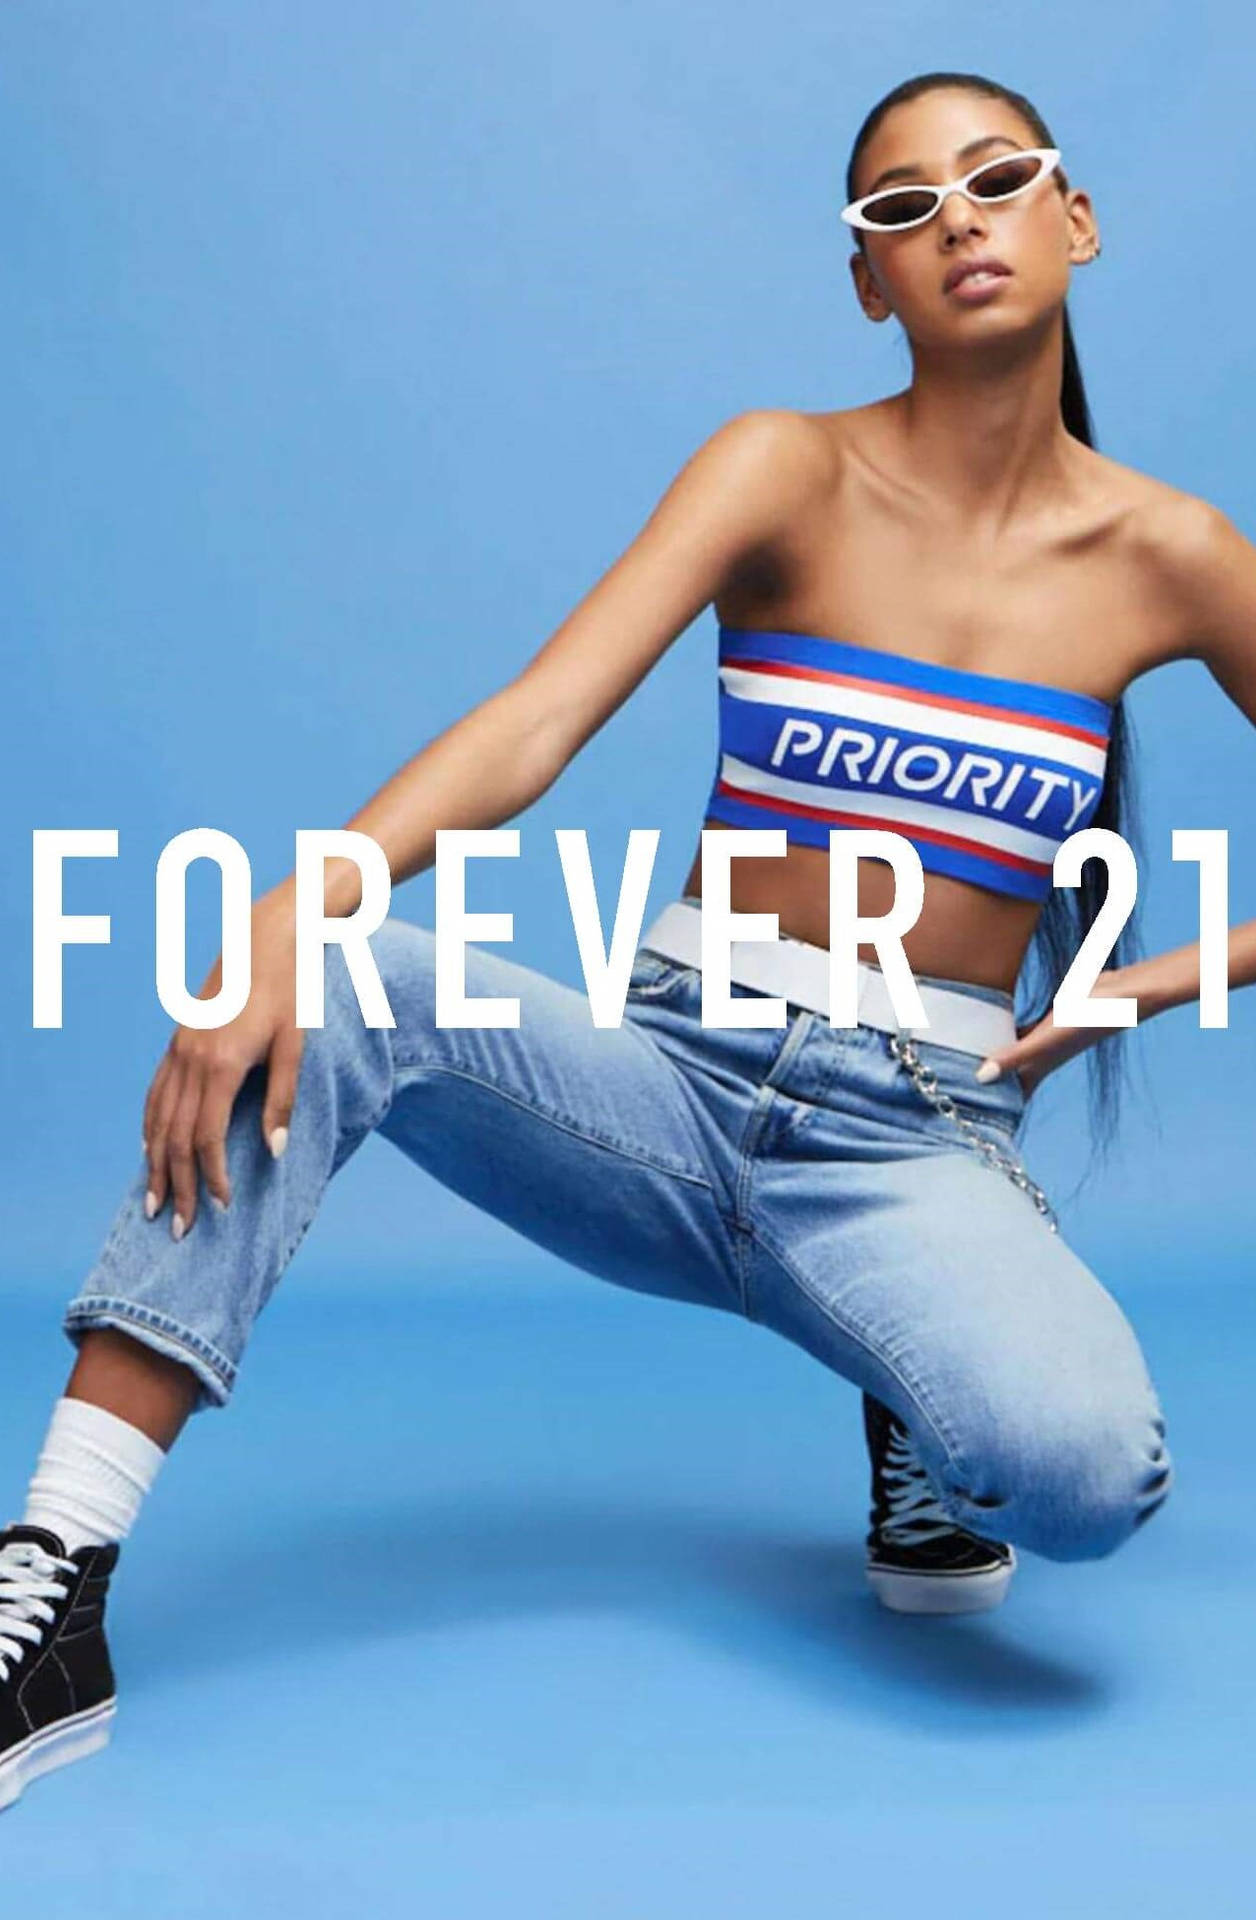 Forever 21 Trendy Clothing Poster Background